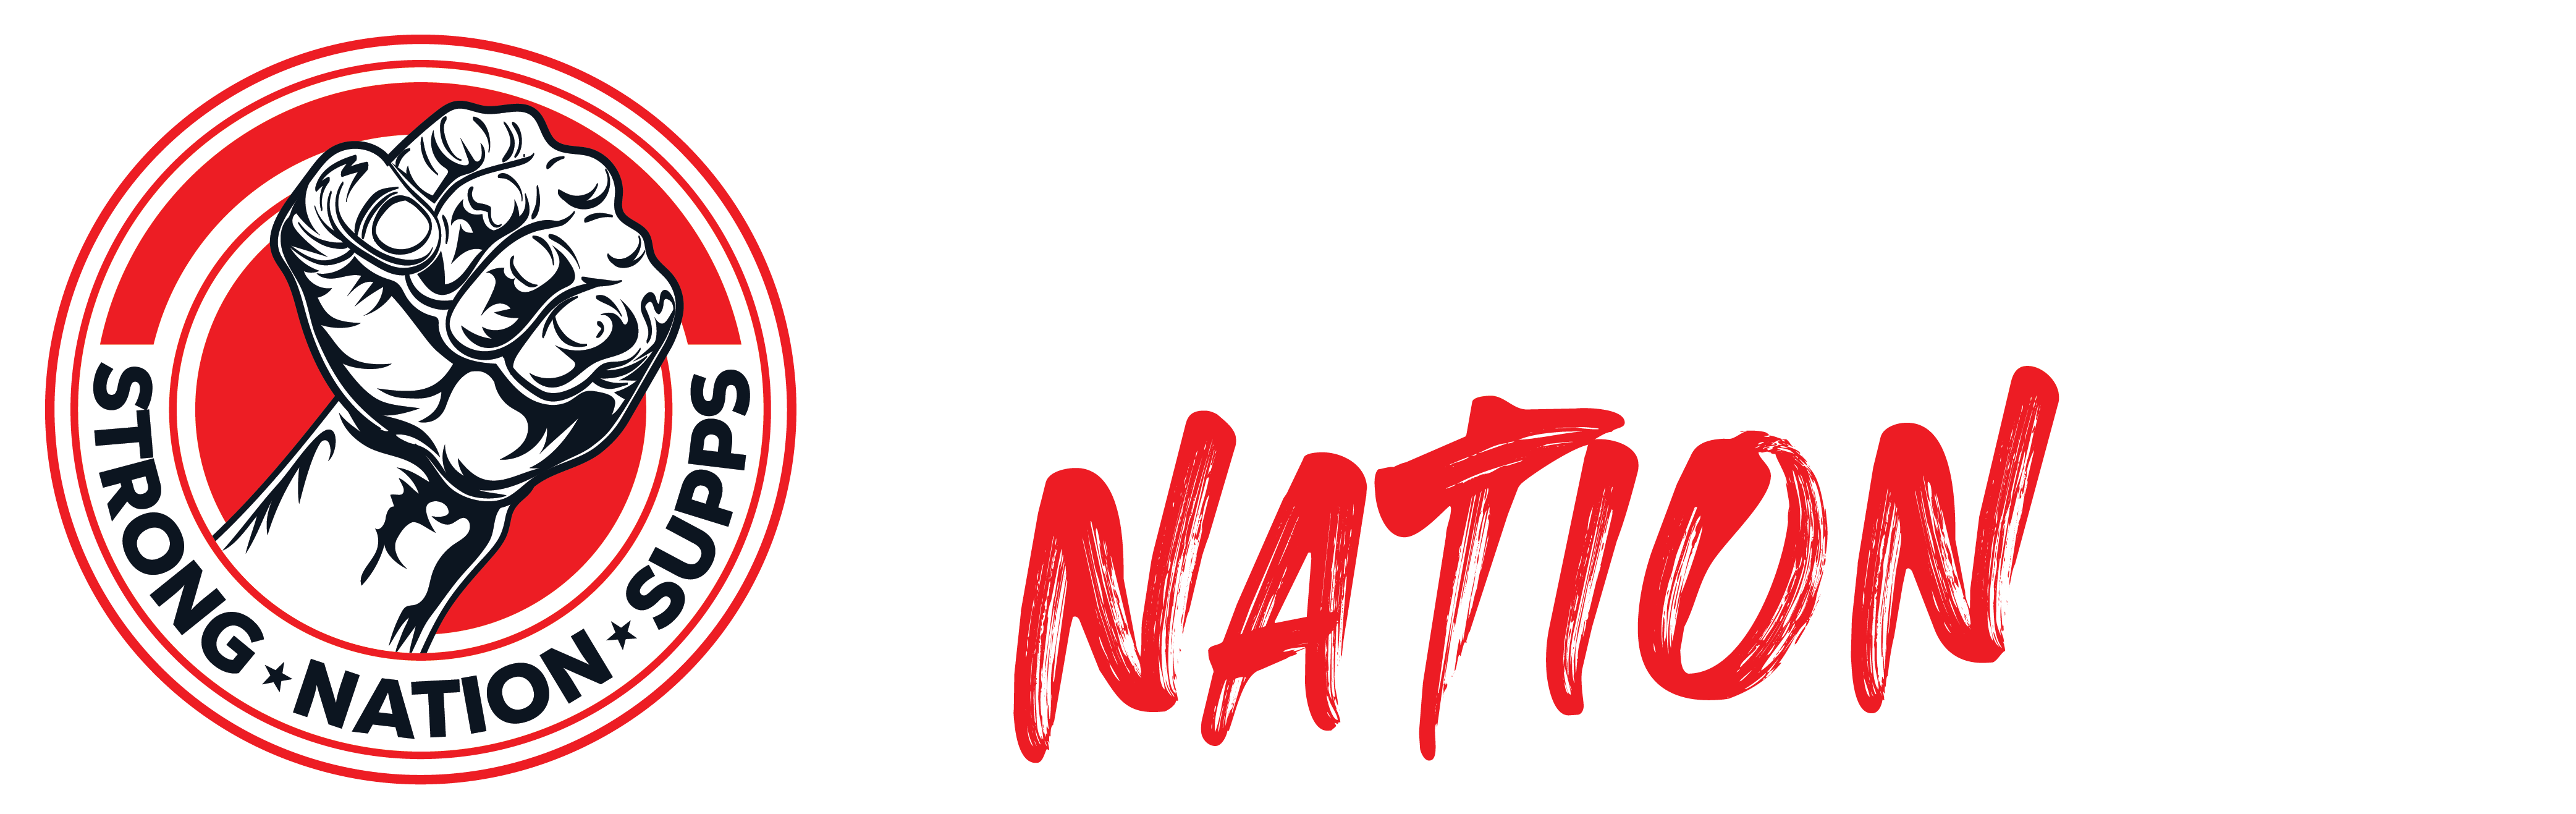 cropped-cropped-SNS-LOGO-LOGO-WHITE-AND-RED-01-01.png